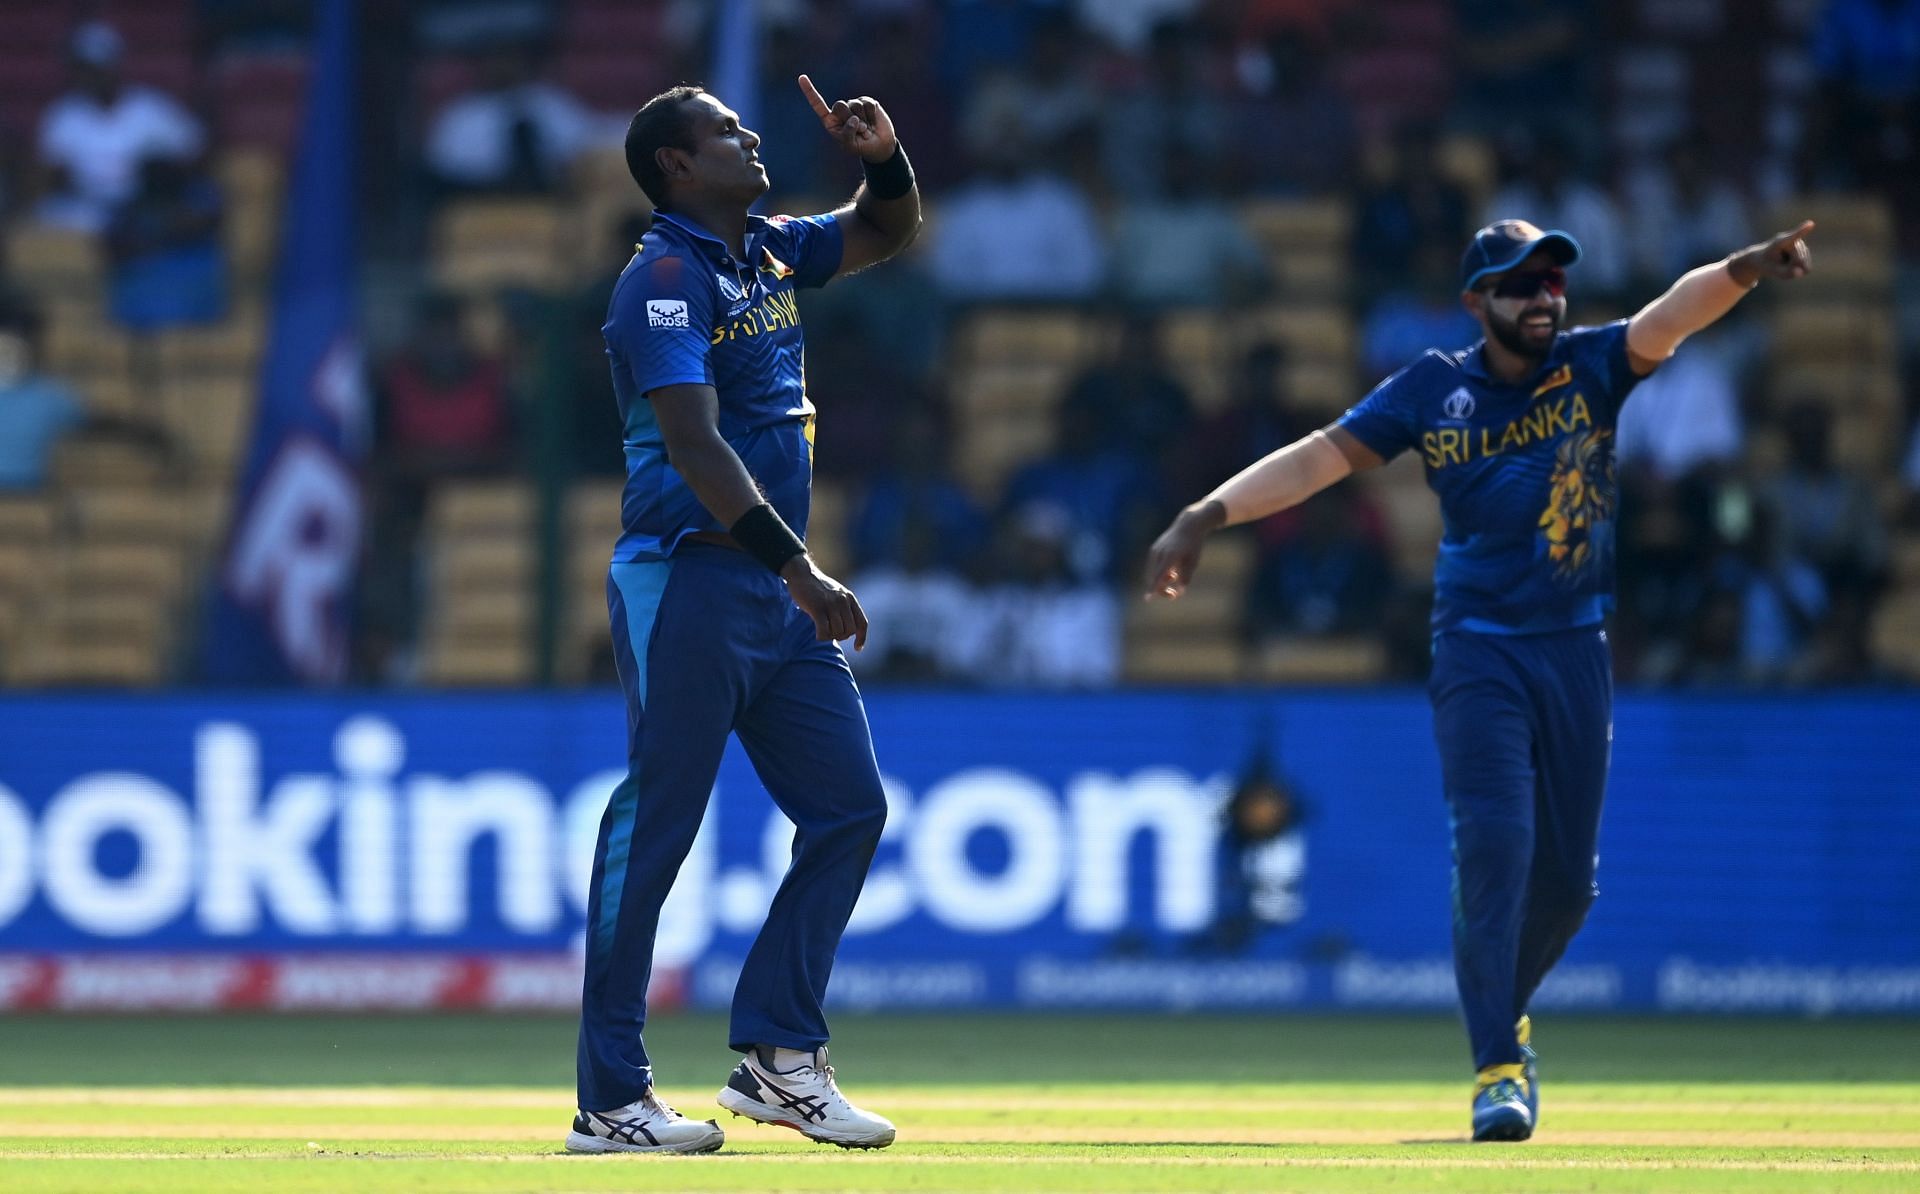 Sri Lanka vs Nepal, 2024 T20 World Cup: Probable playing 11s, pitch report, weather forecast and live-streaming details